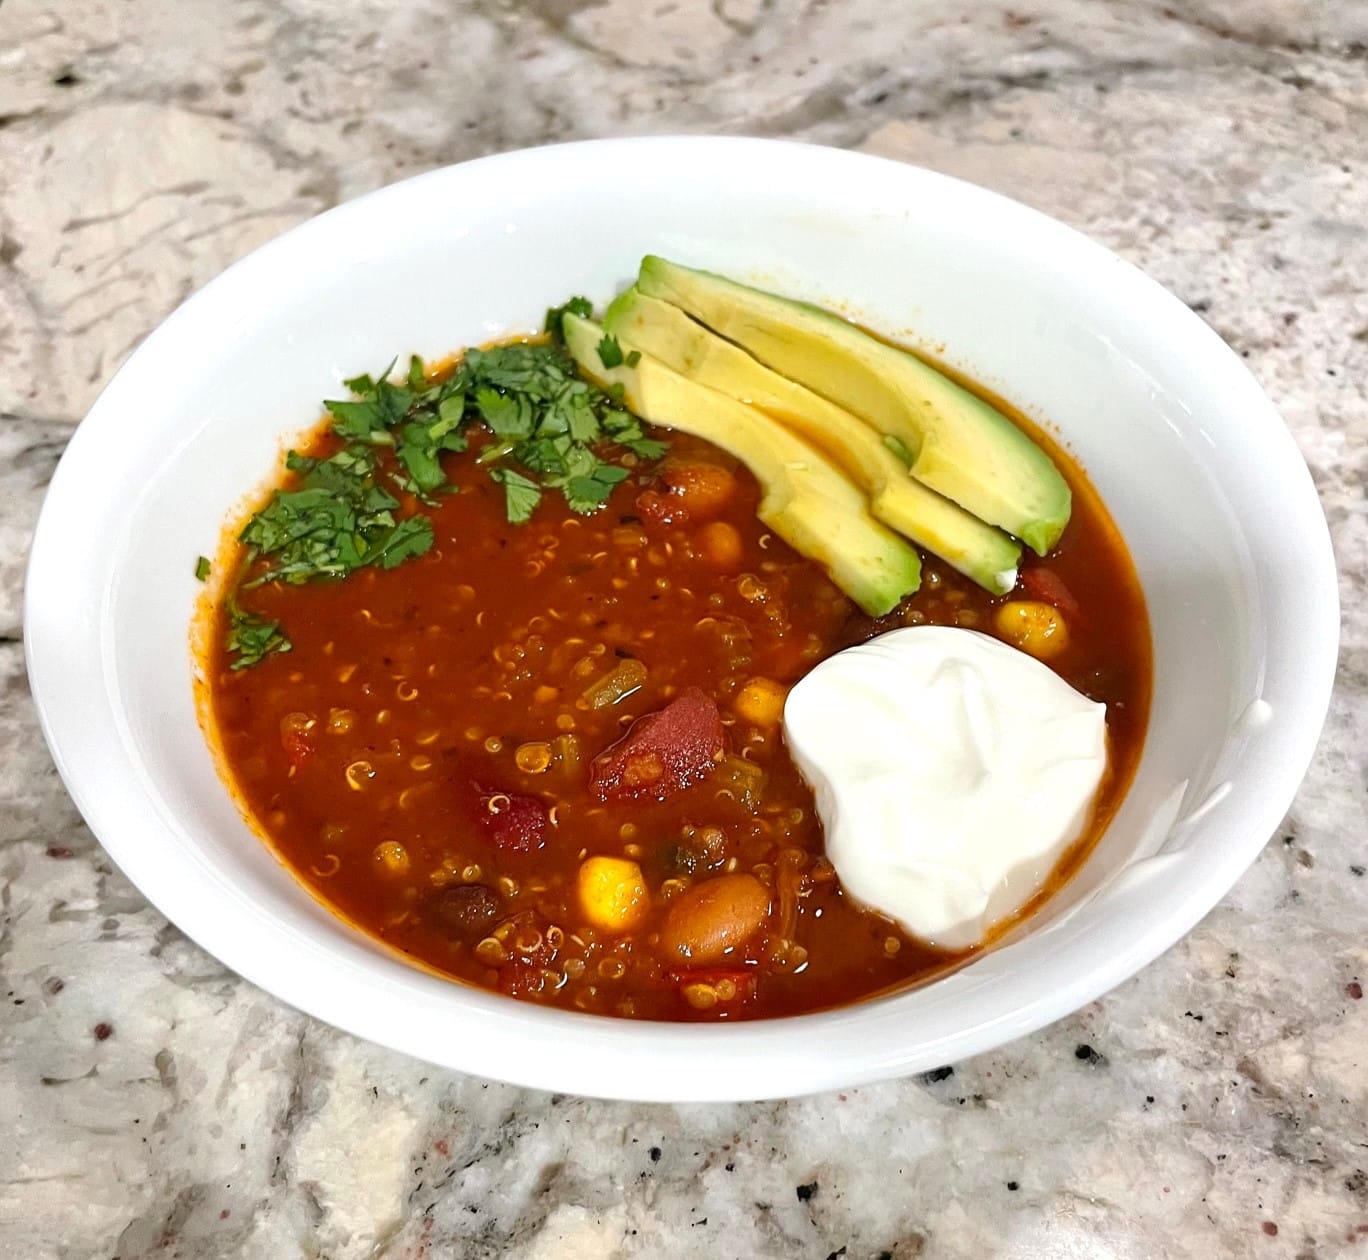 Photo of a bowl of Protien-Packed Veggie Chili with Quinoa, by Anna Milligan. She won the 2022 Best Looking Chili. Red with yellow corn throughout, topped with avocado, herbs, and sour cream.